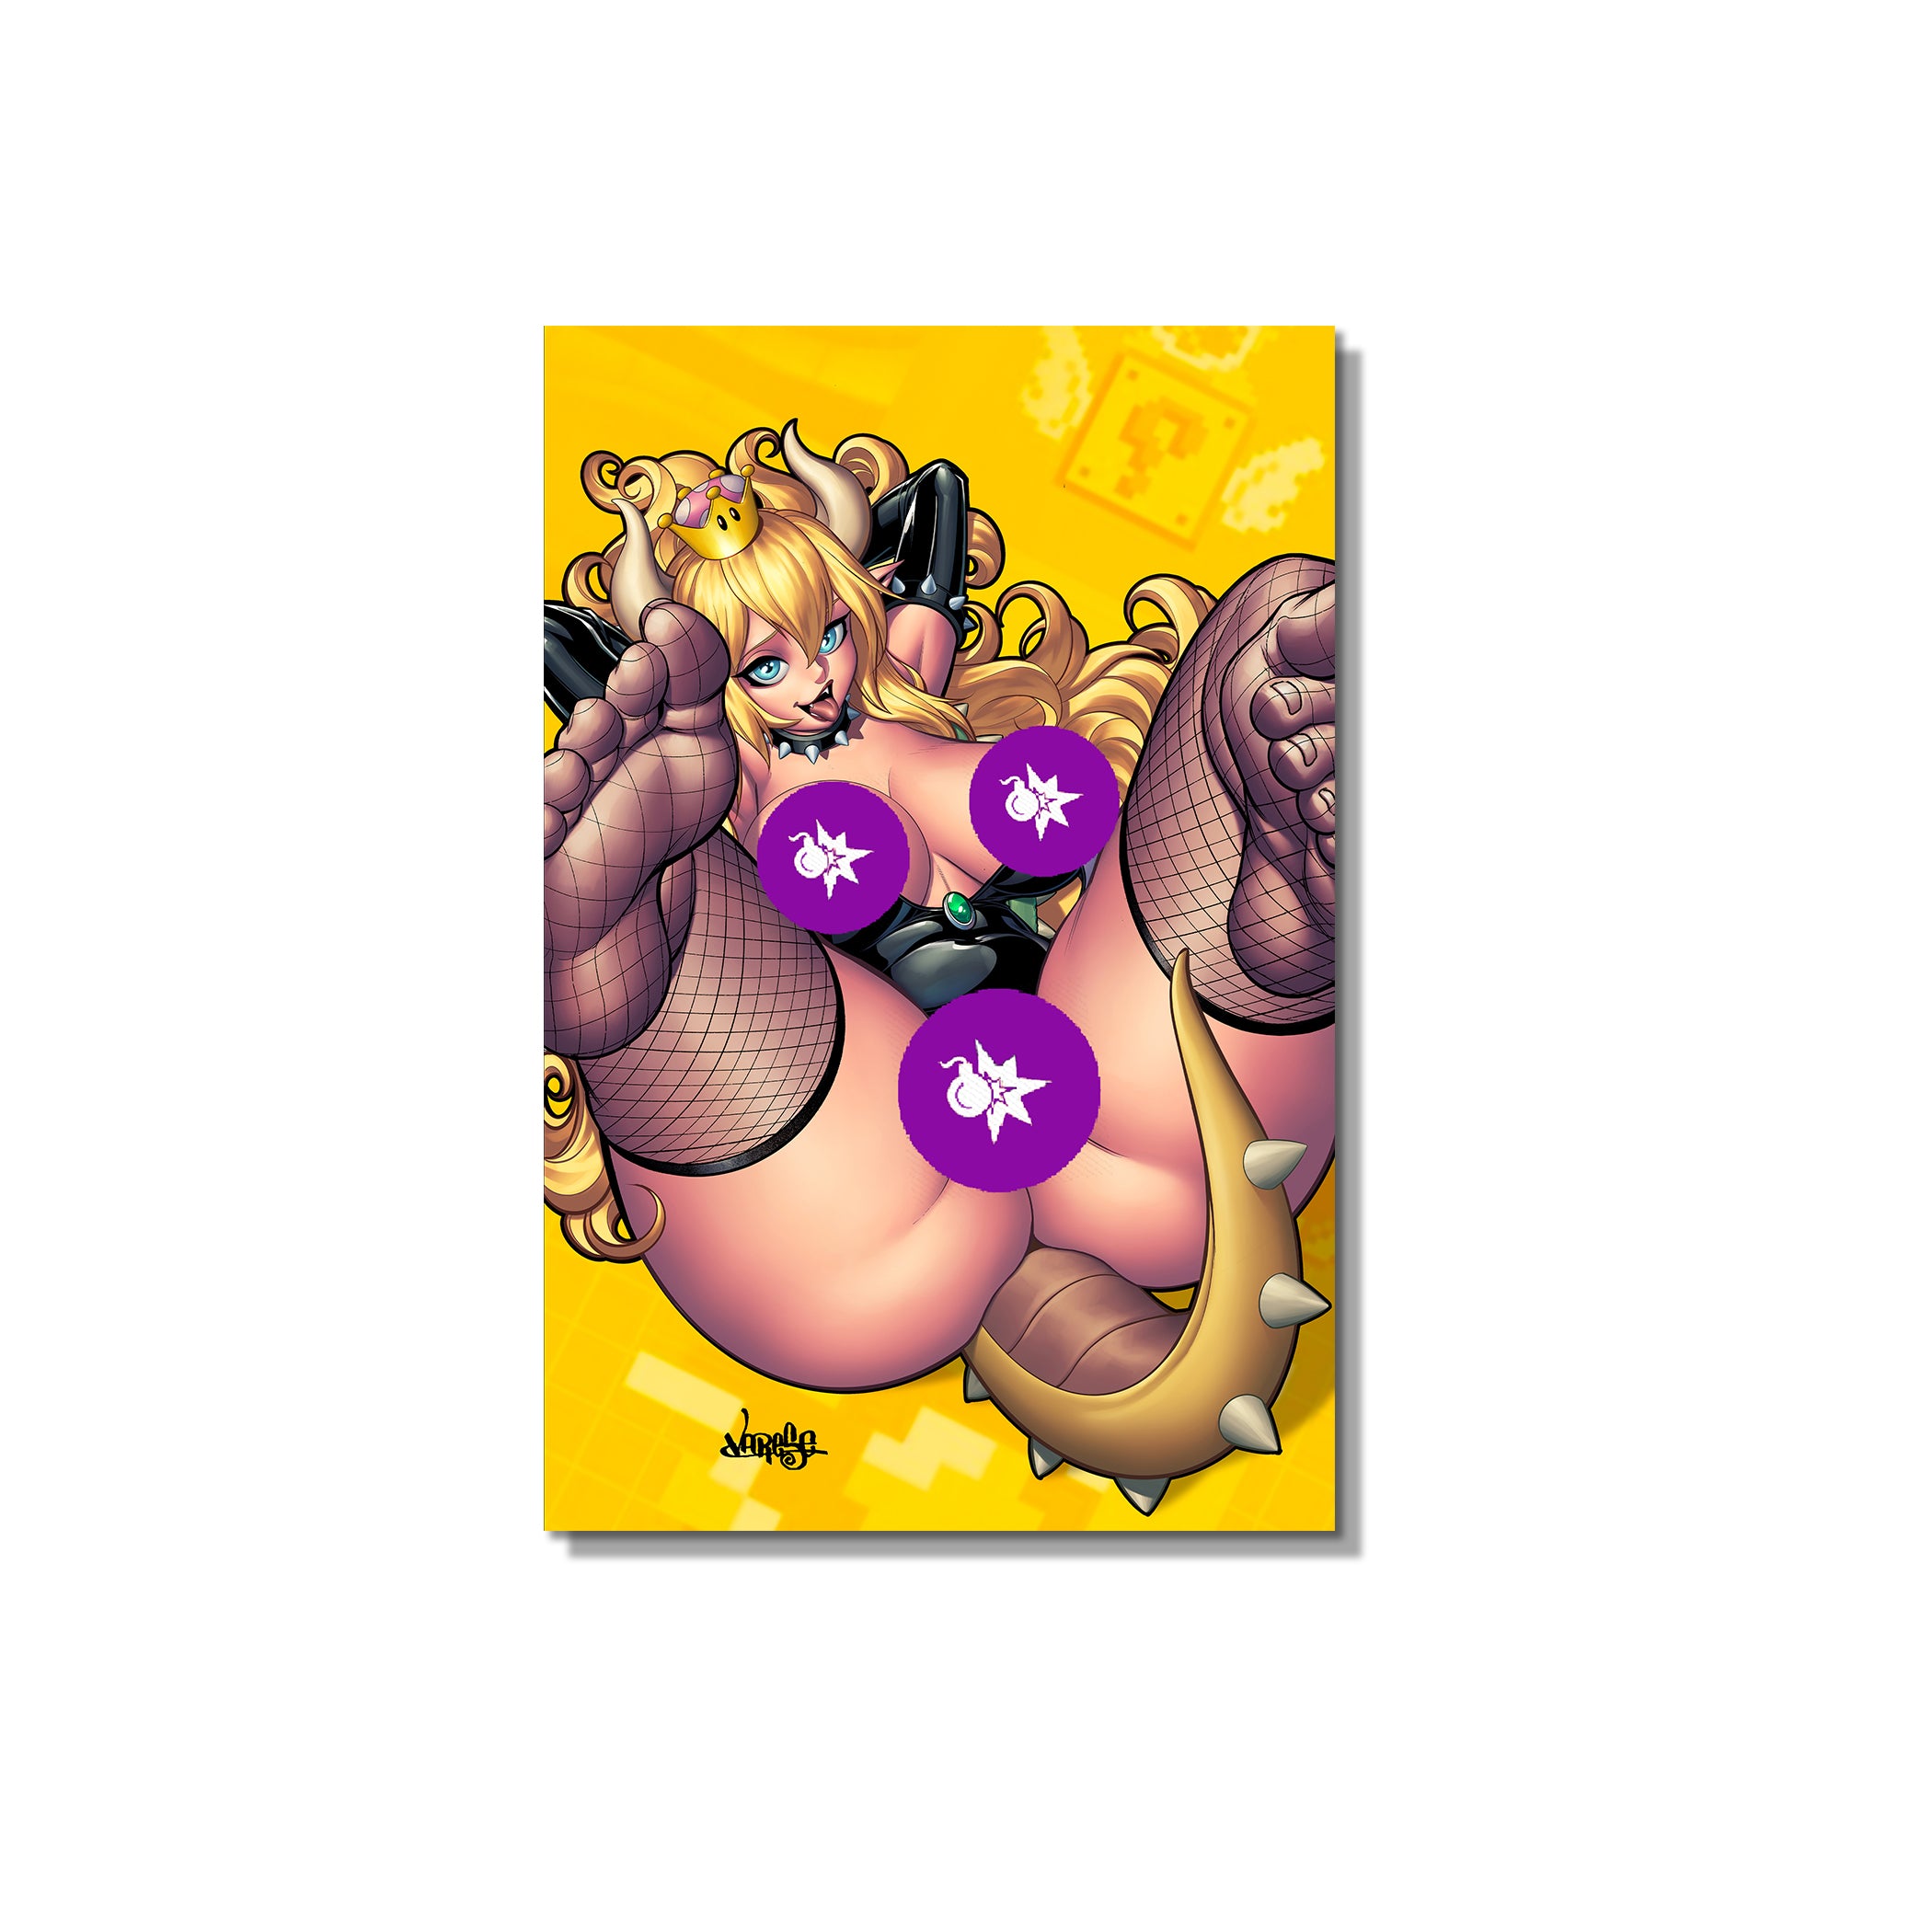 PLAYSUPER Mamma Mia, This is Notta Bowser Naughty Virgin